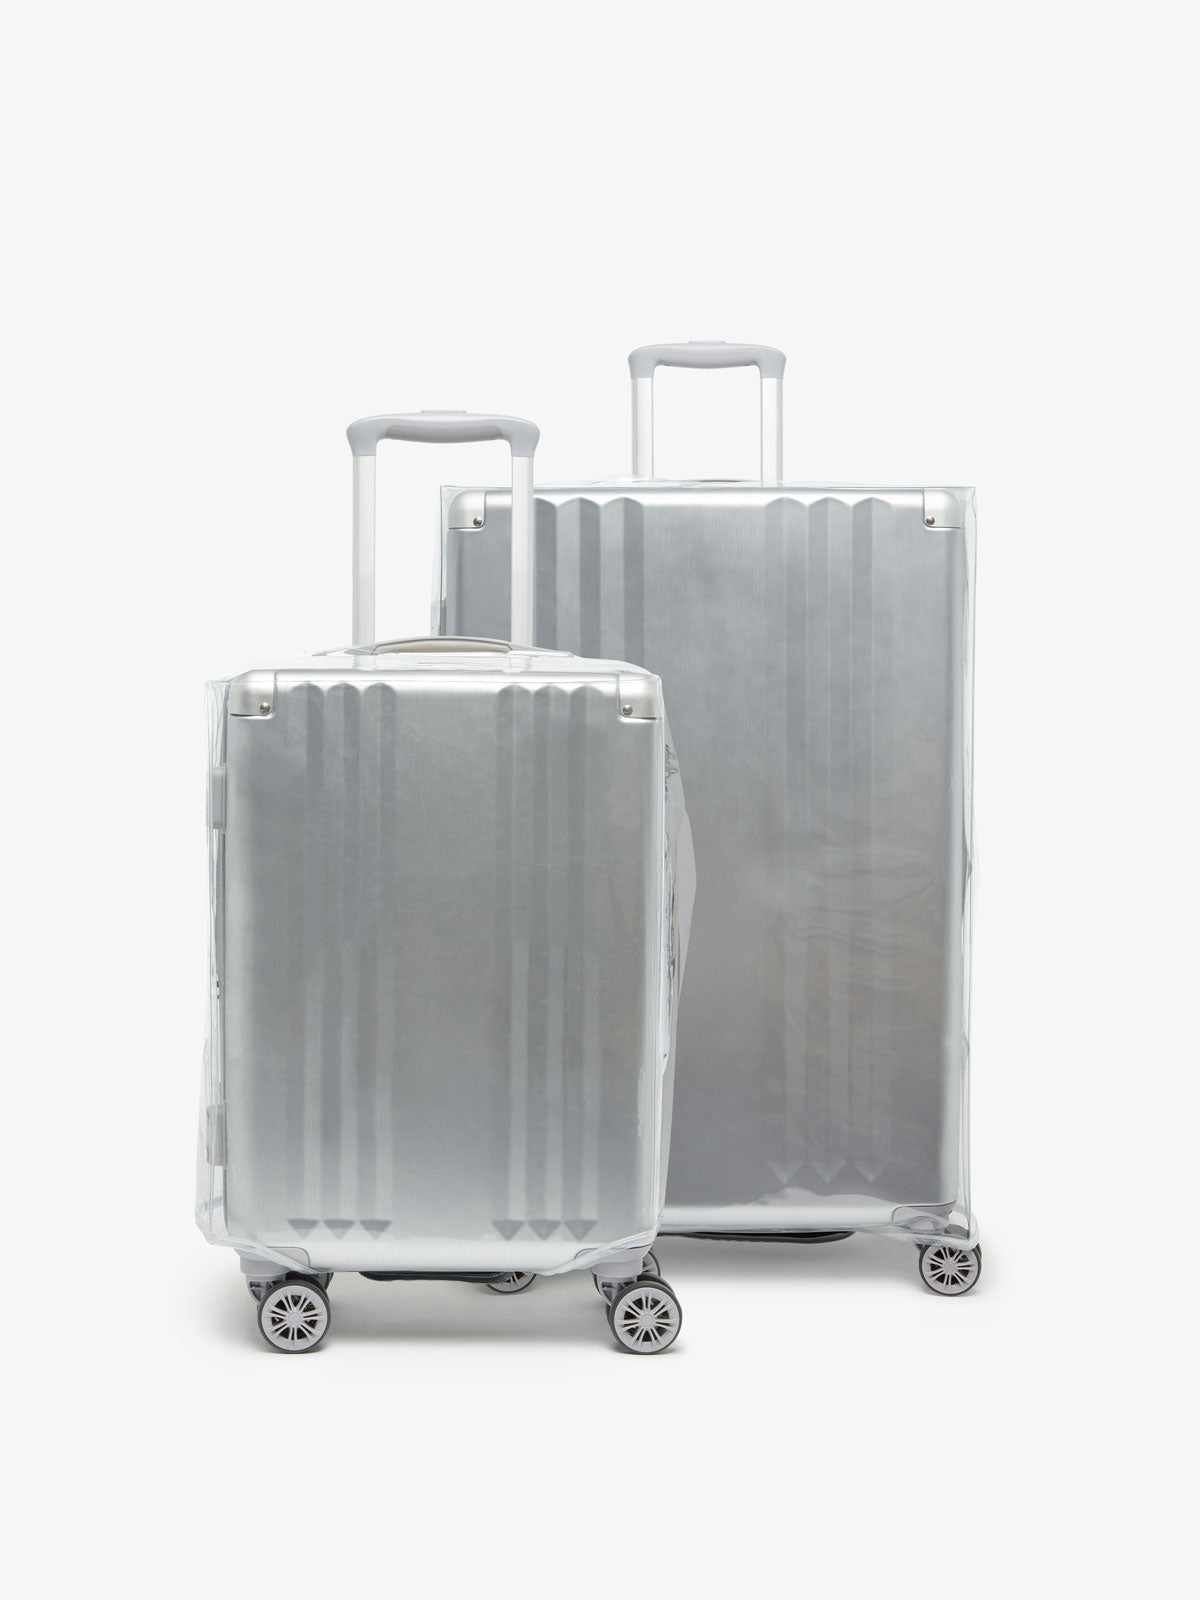 Plastic clear simple luggage cover with velcro closure at bottom for CALPAK 2-piece luggage sets